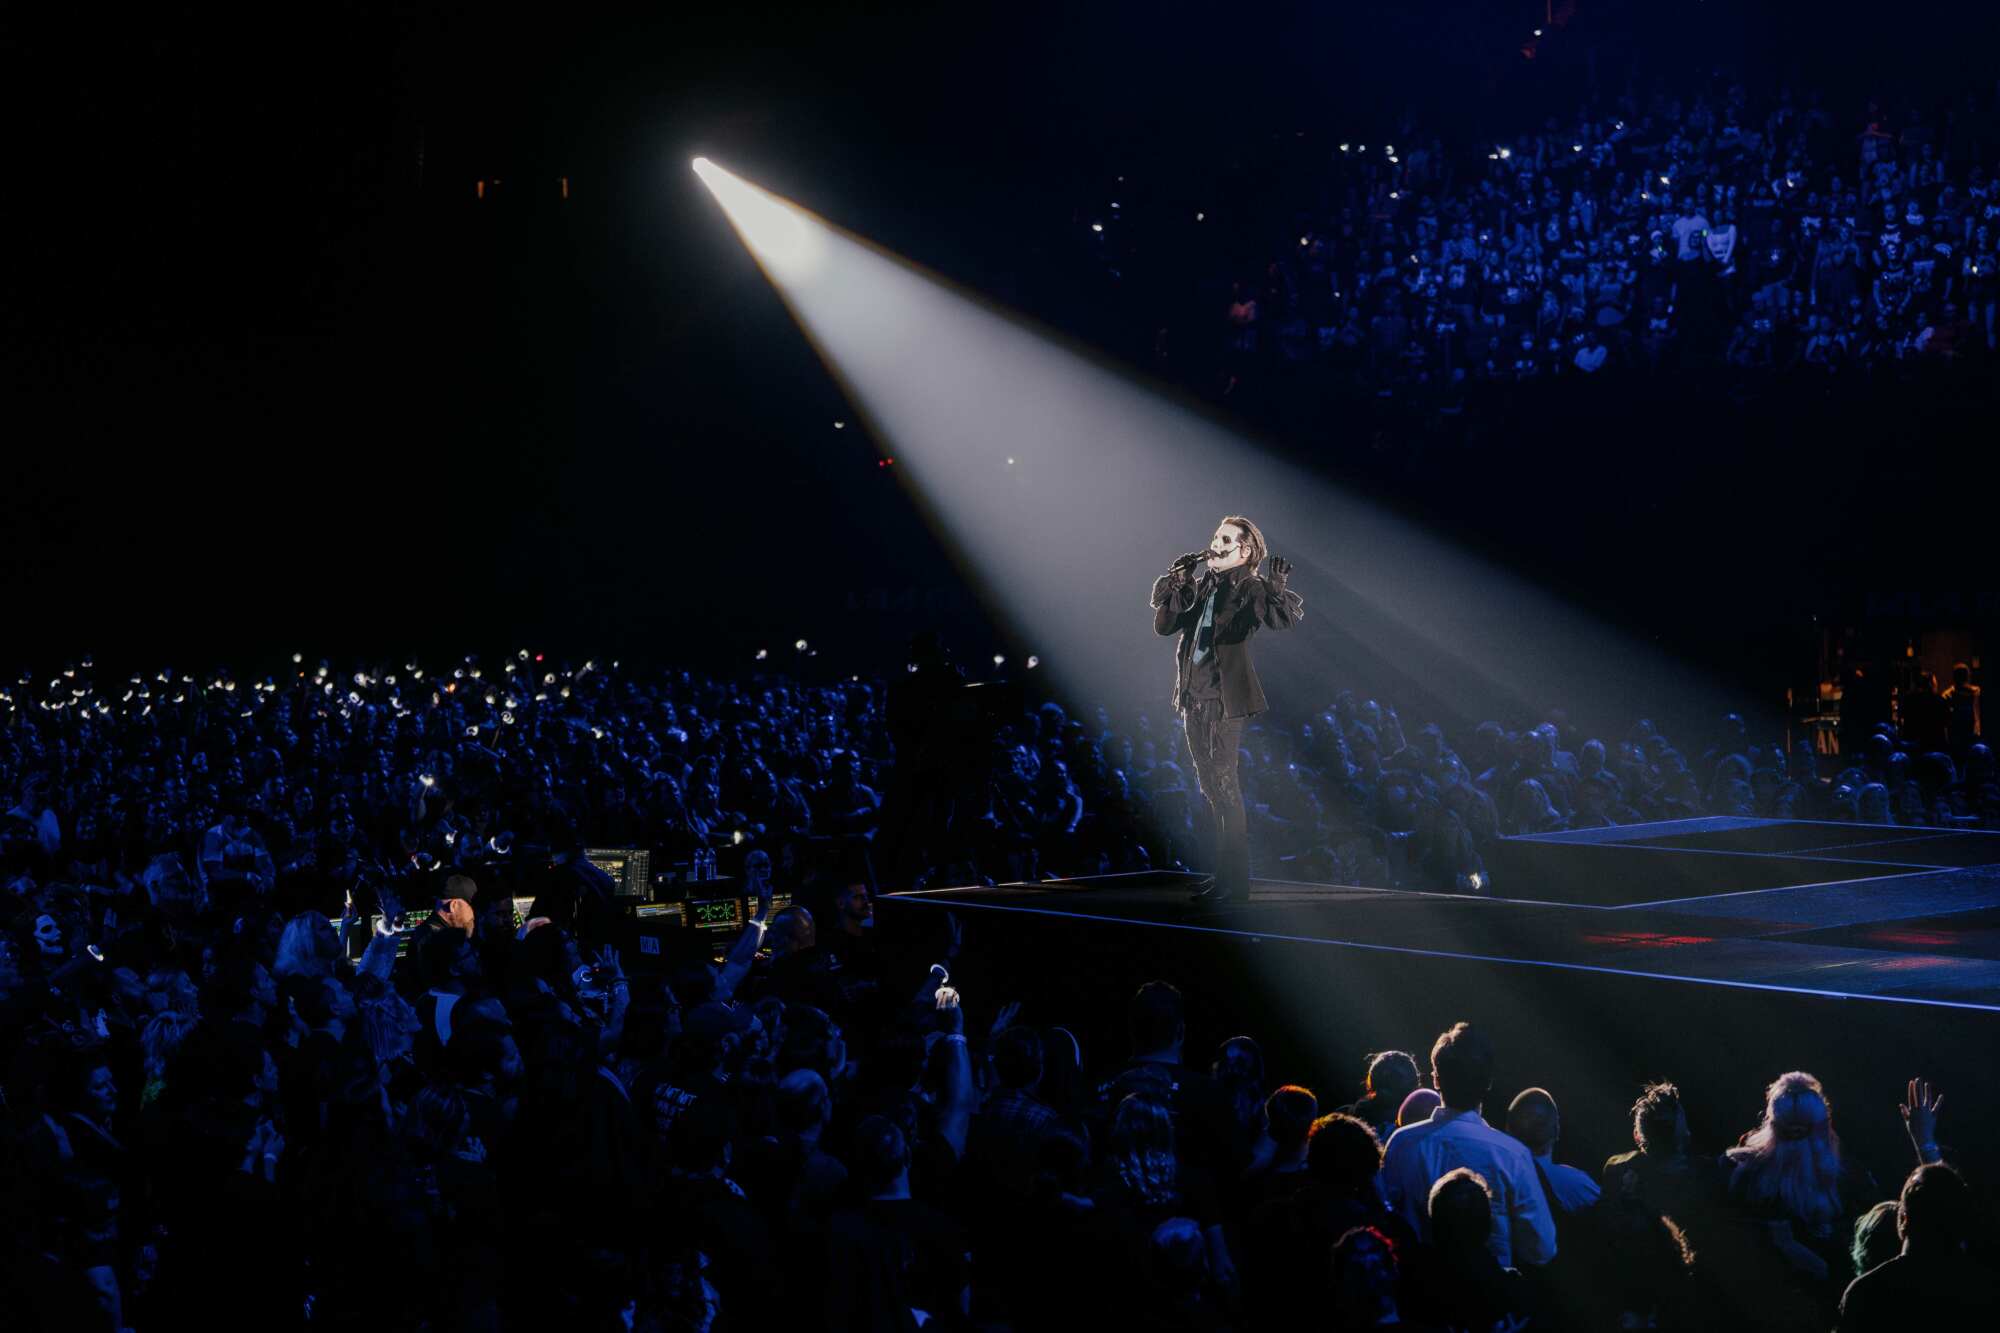 A singer in a spotlight performs in front of a huge crowd.